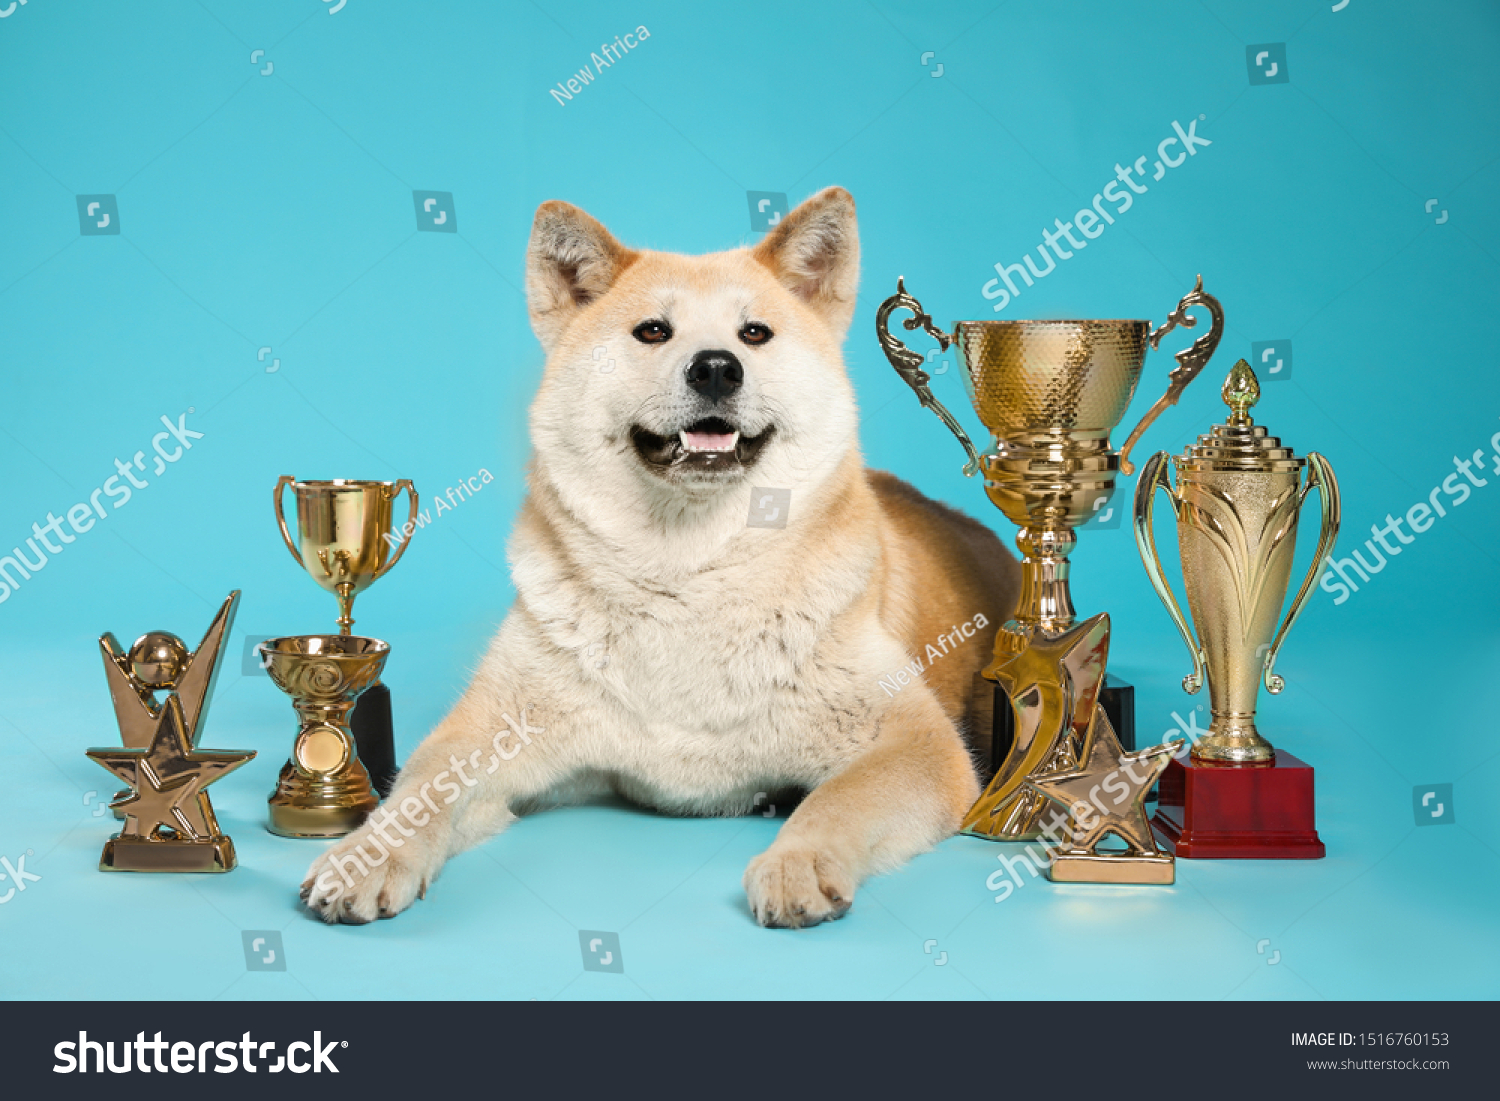 Adorable Akita Inu Dog Champion Trophies Stock Photo Edit Now 1516760153 Command center building commanding the center: shutterstock